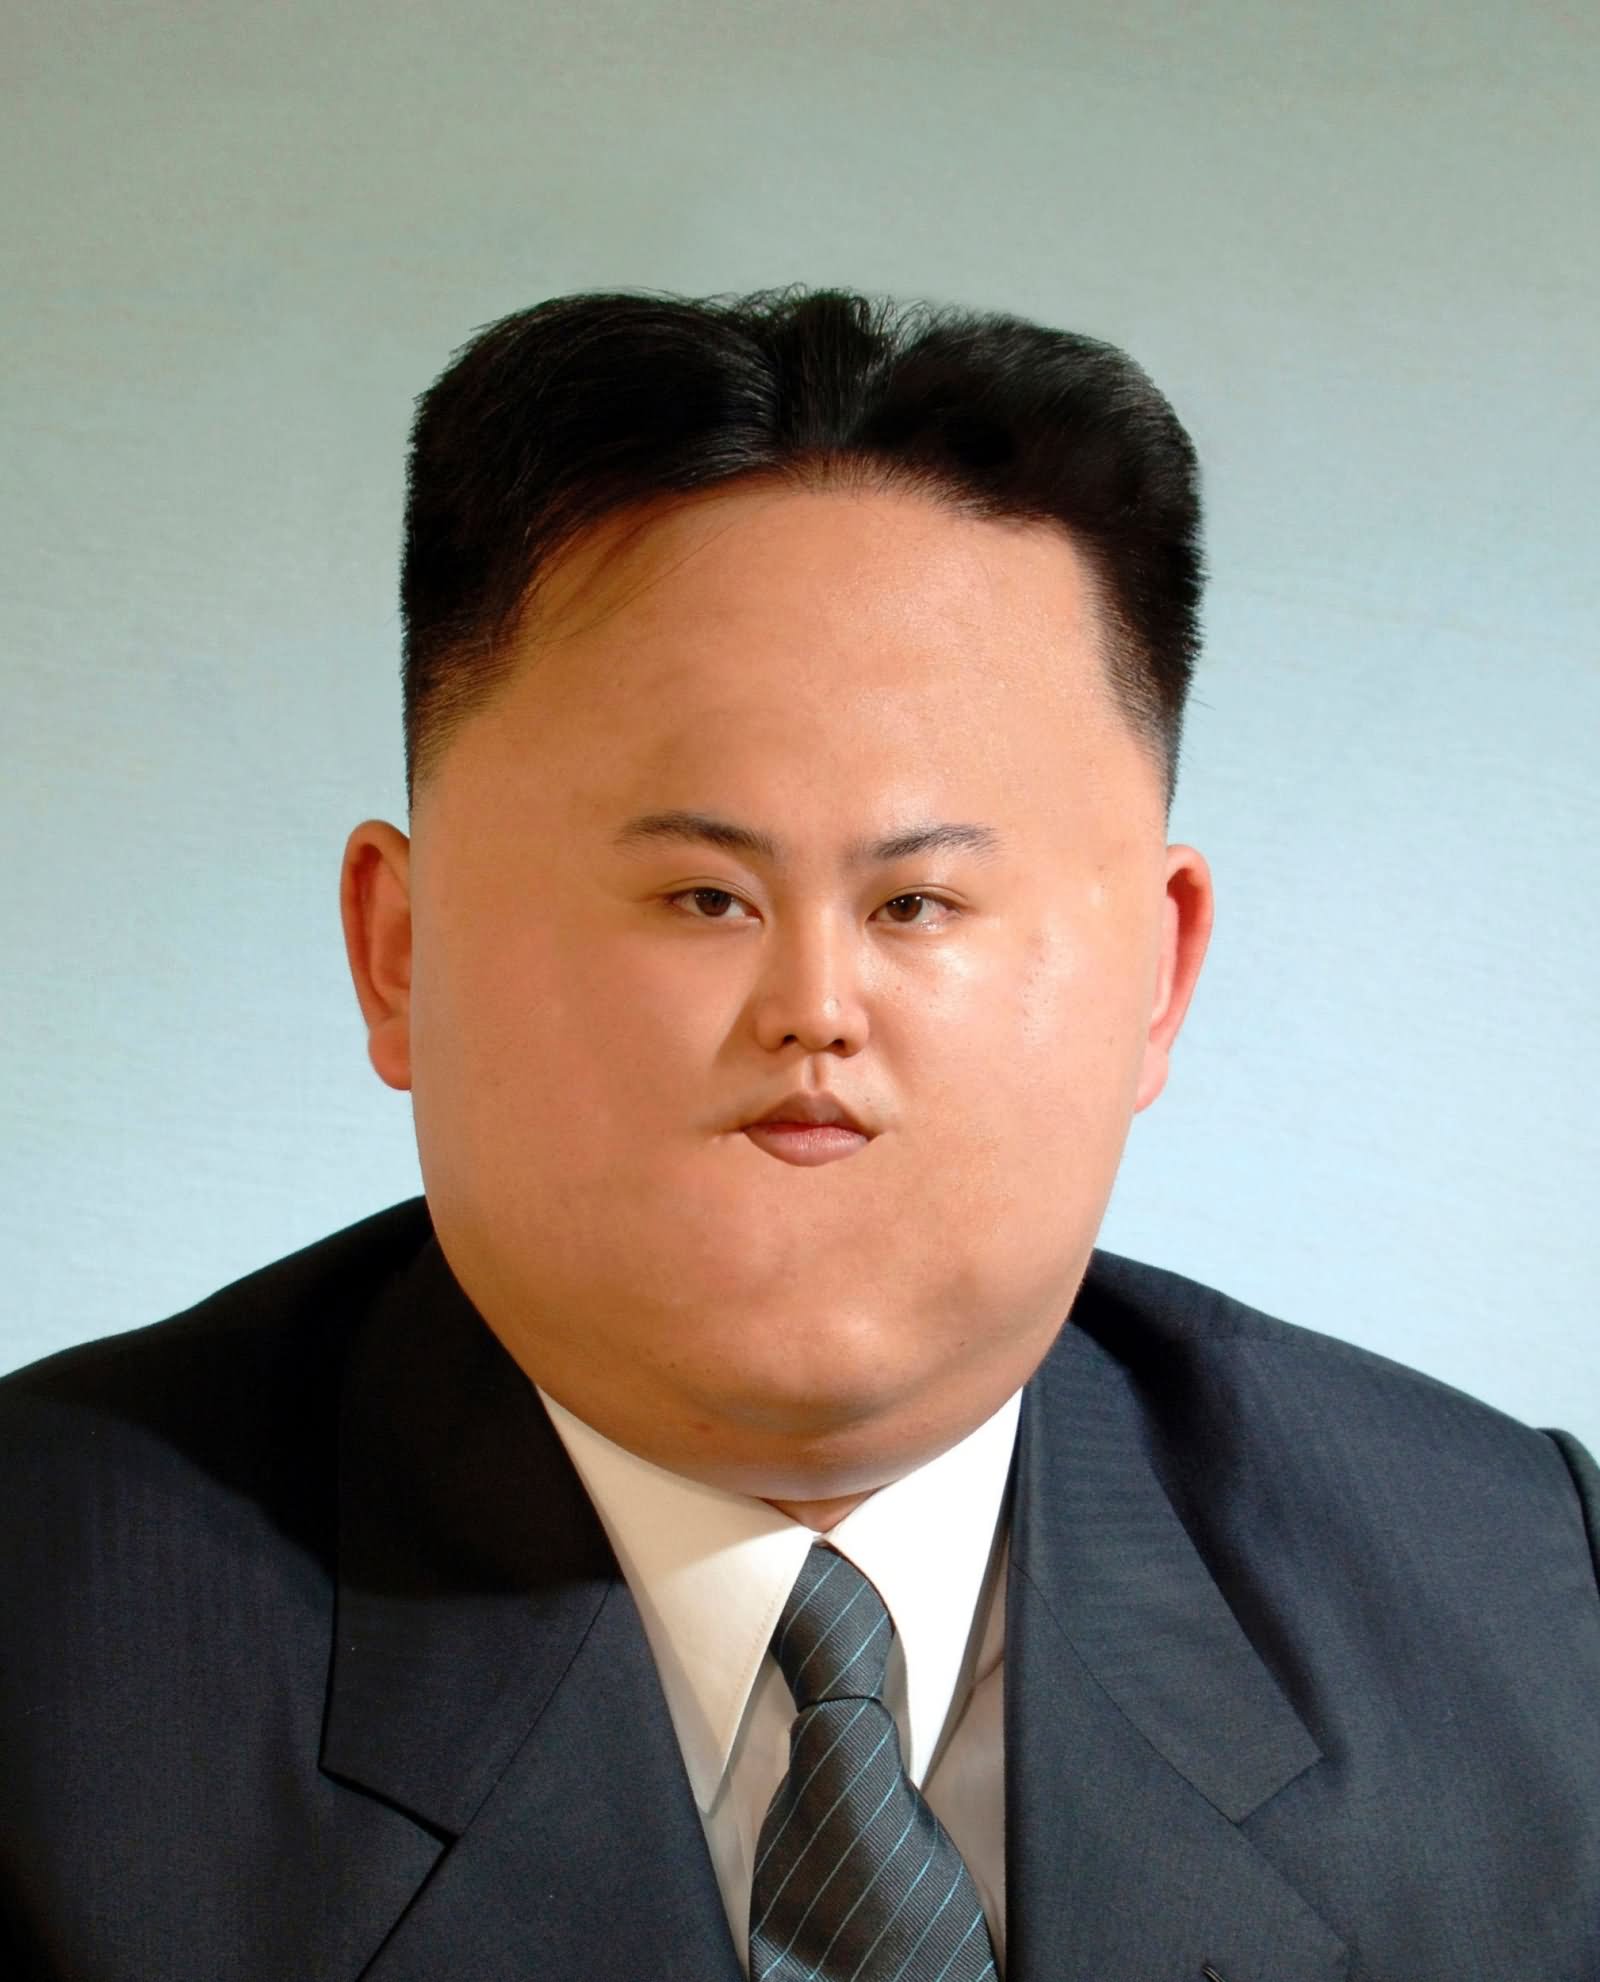 Kim Jong Un Funny Photoshopped Face Picture